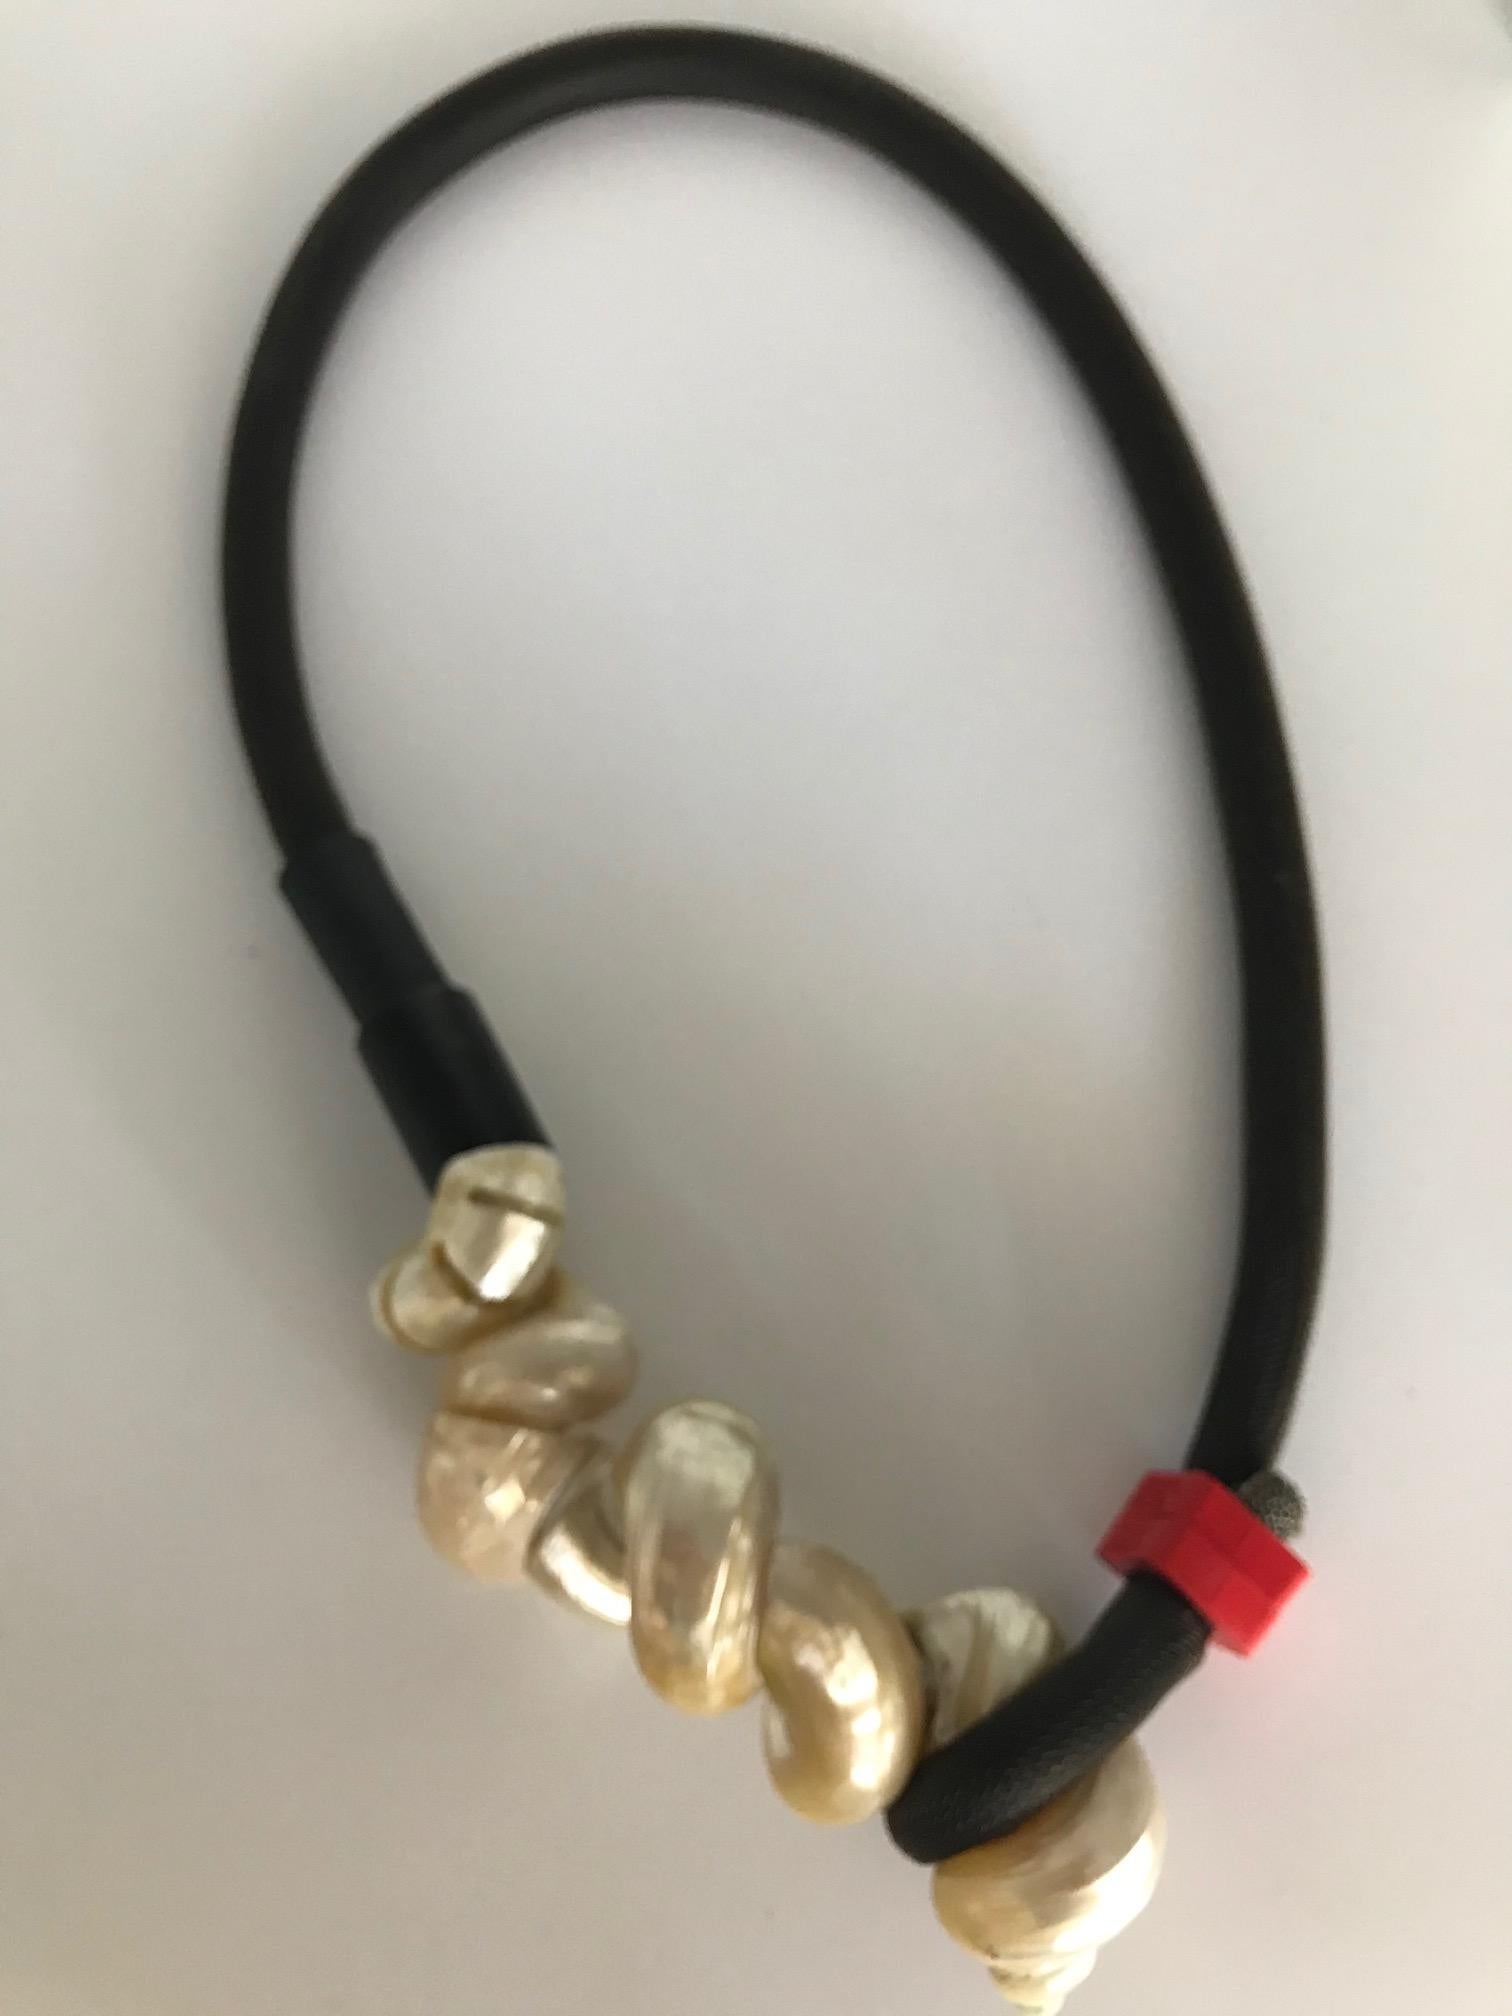 
This is a Pendant of Small Turbo Shells on a Rubber Tube. Designing with small and medium shells is a labor of love because  pearl producing oysters will be cultured even when the oceans become too acidified for their survival. However, it is